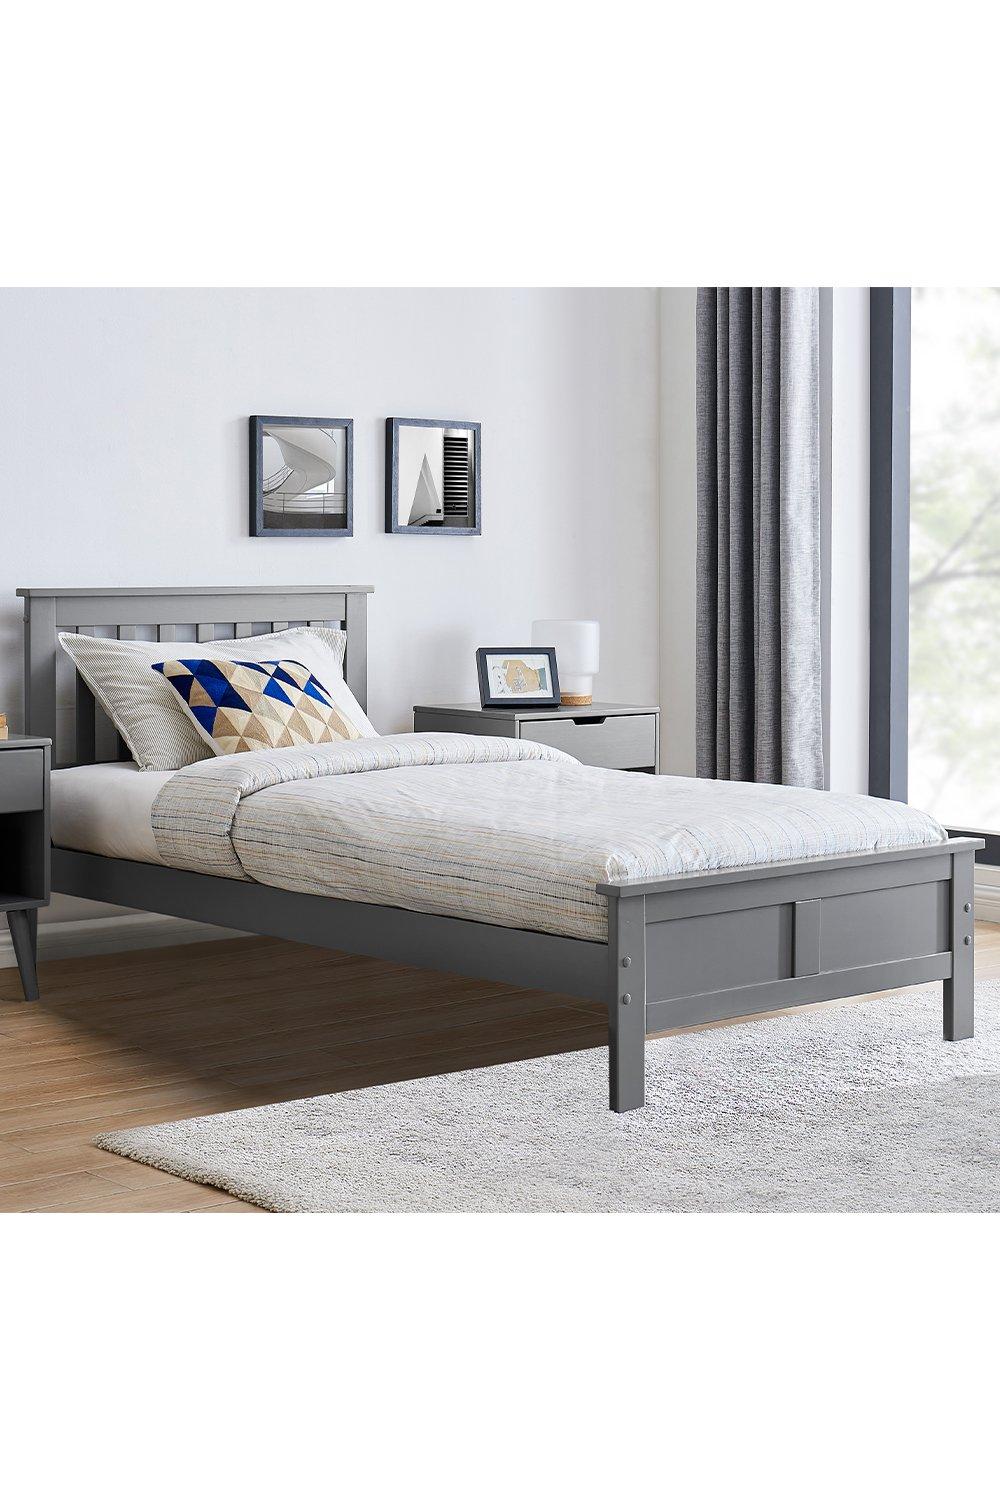 Azure Grey Wooden Solid Pine Quality Double Bed Frame (Double Bed Frame Only) Modern Simple Design